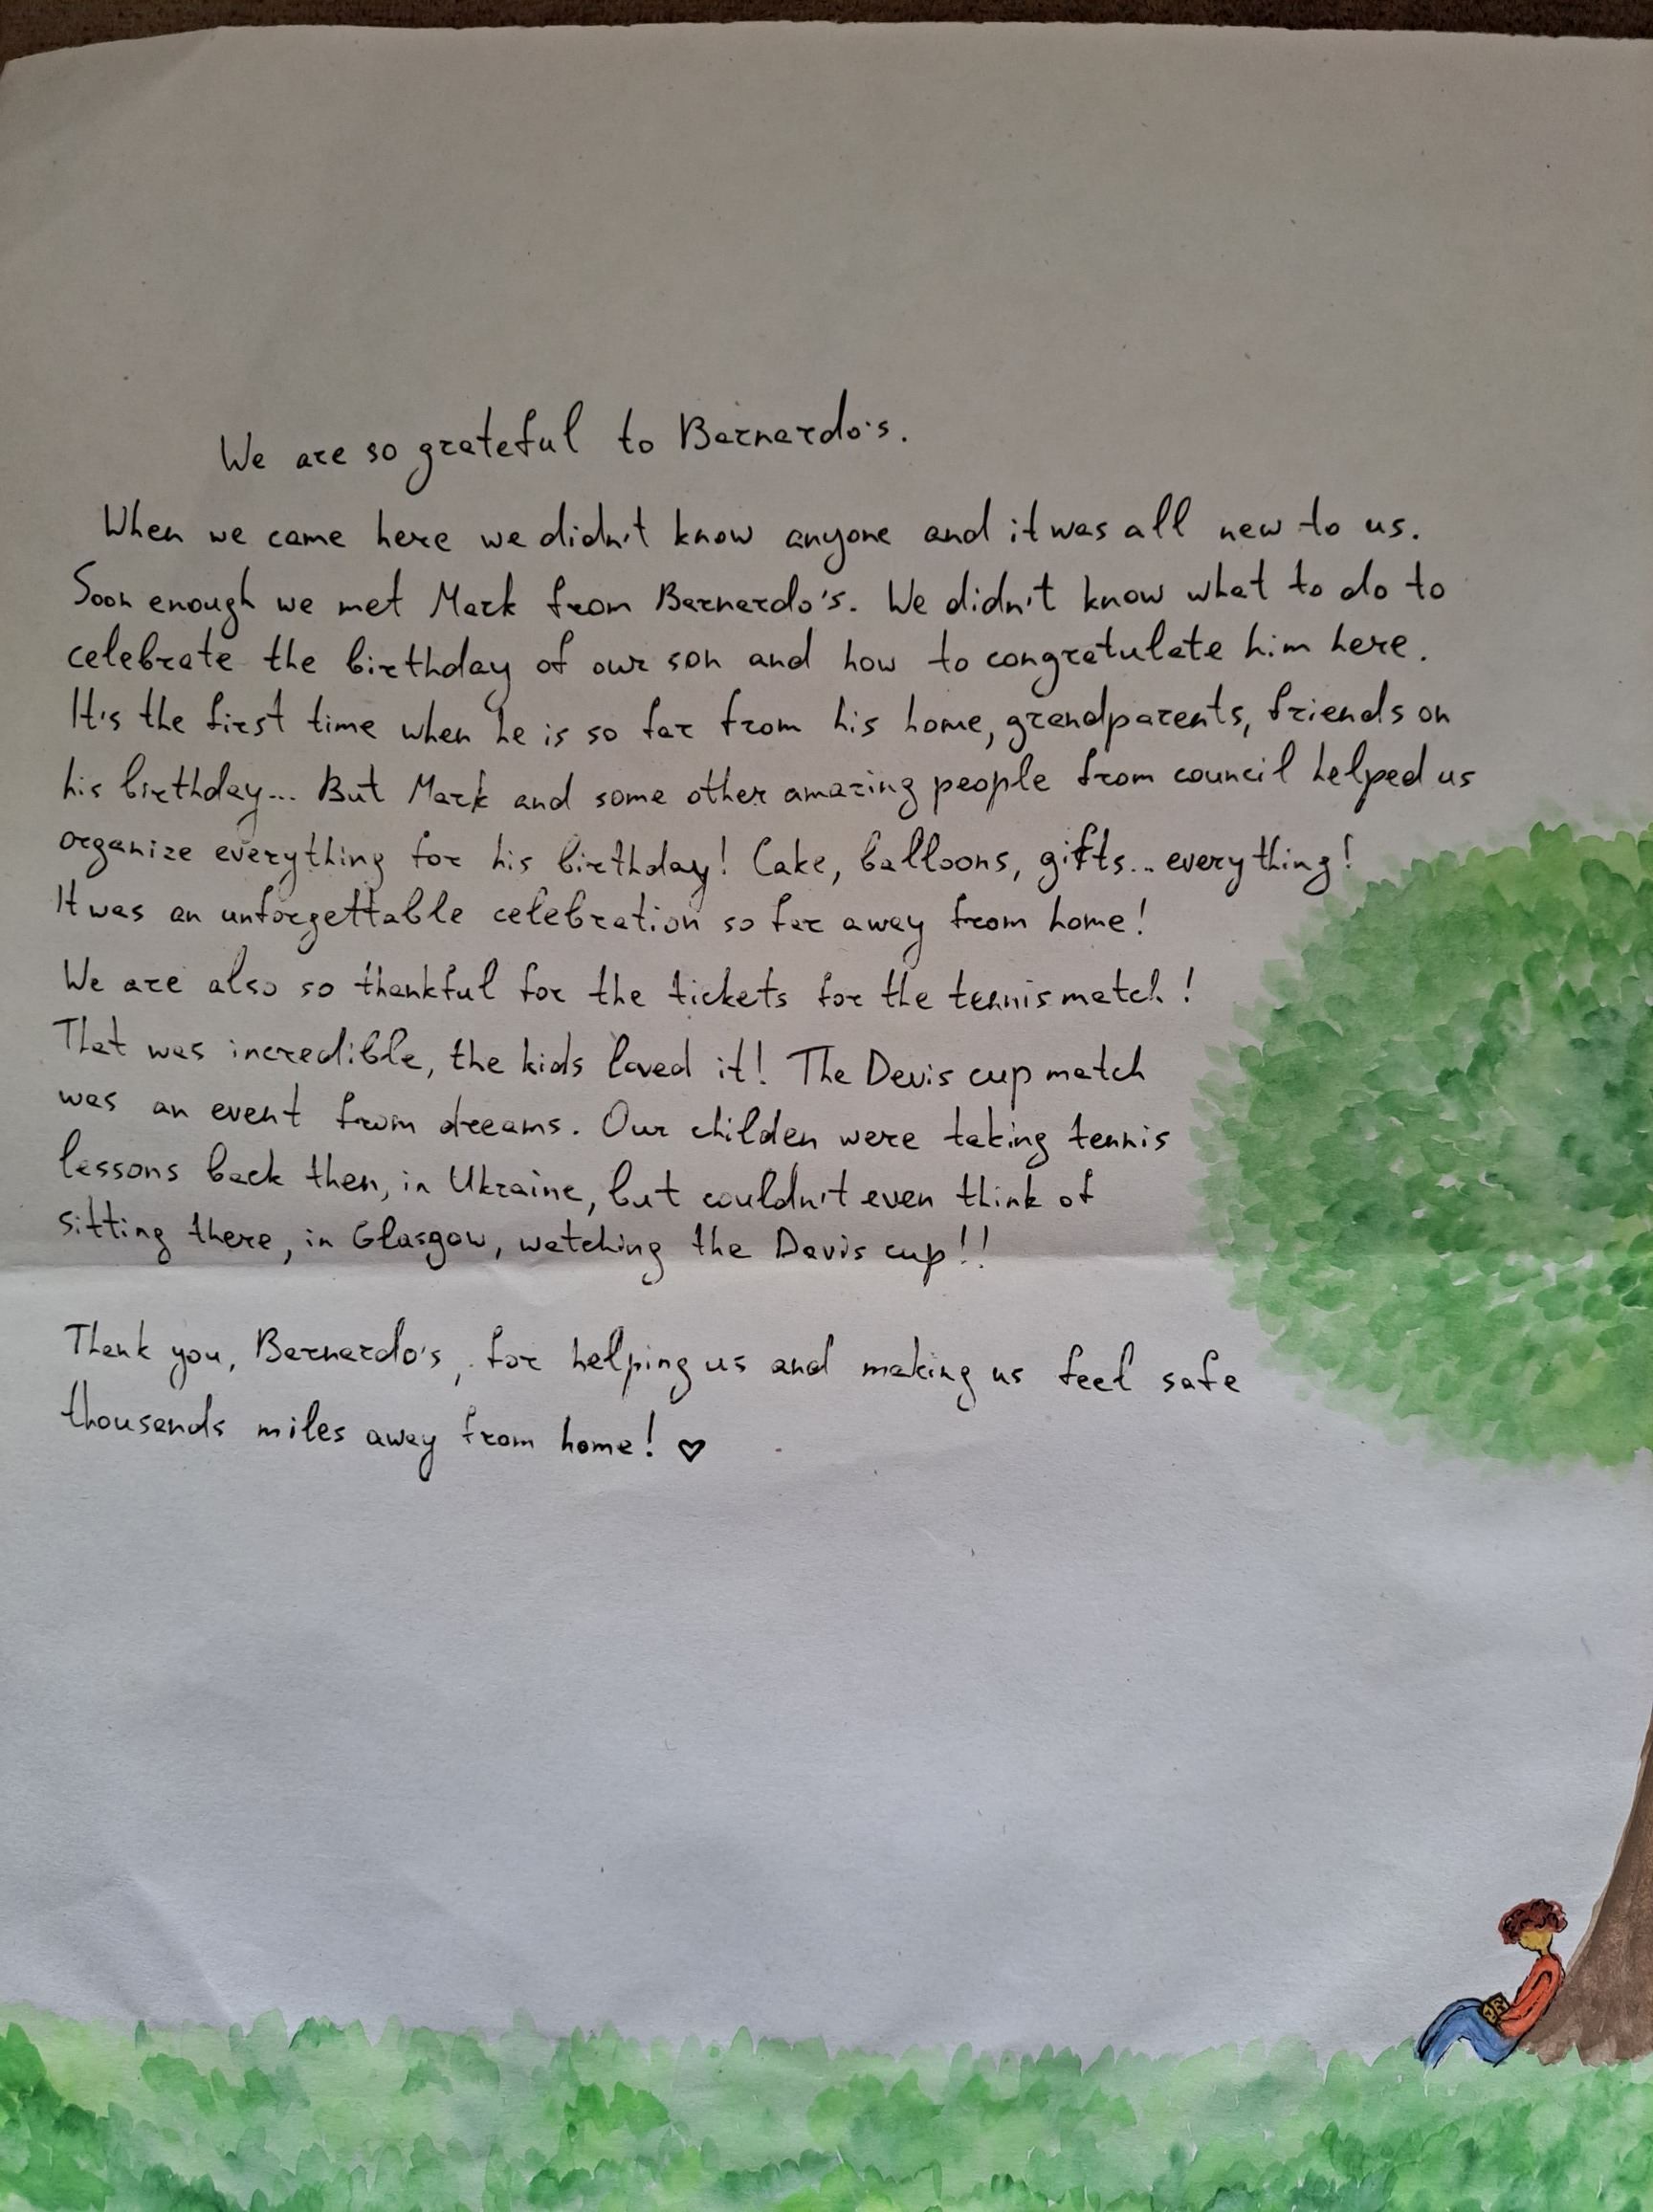 A letter to Barnardo's from families given support by the charity.